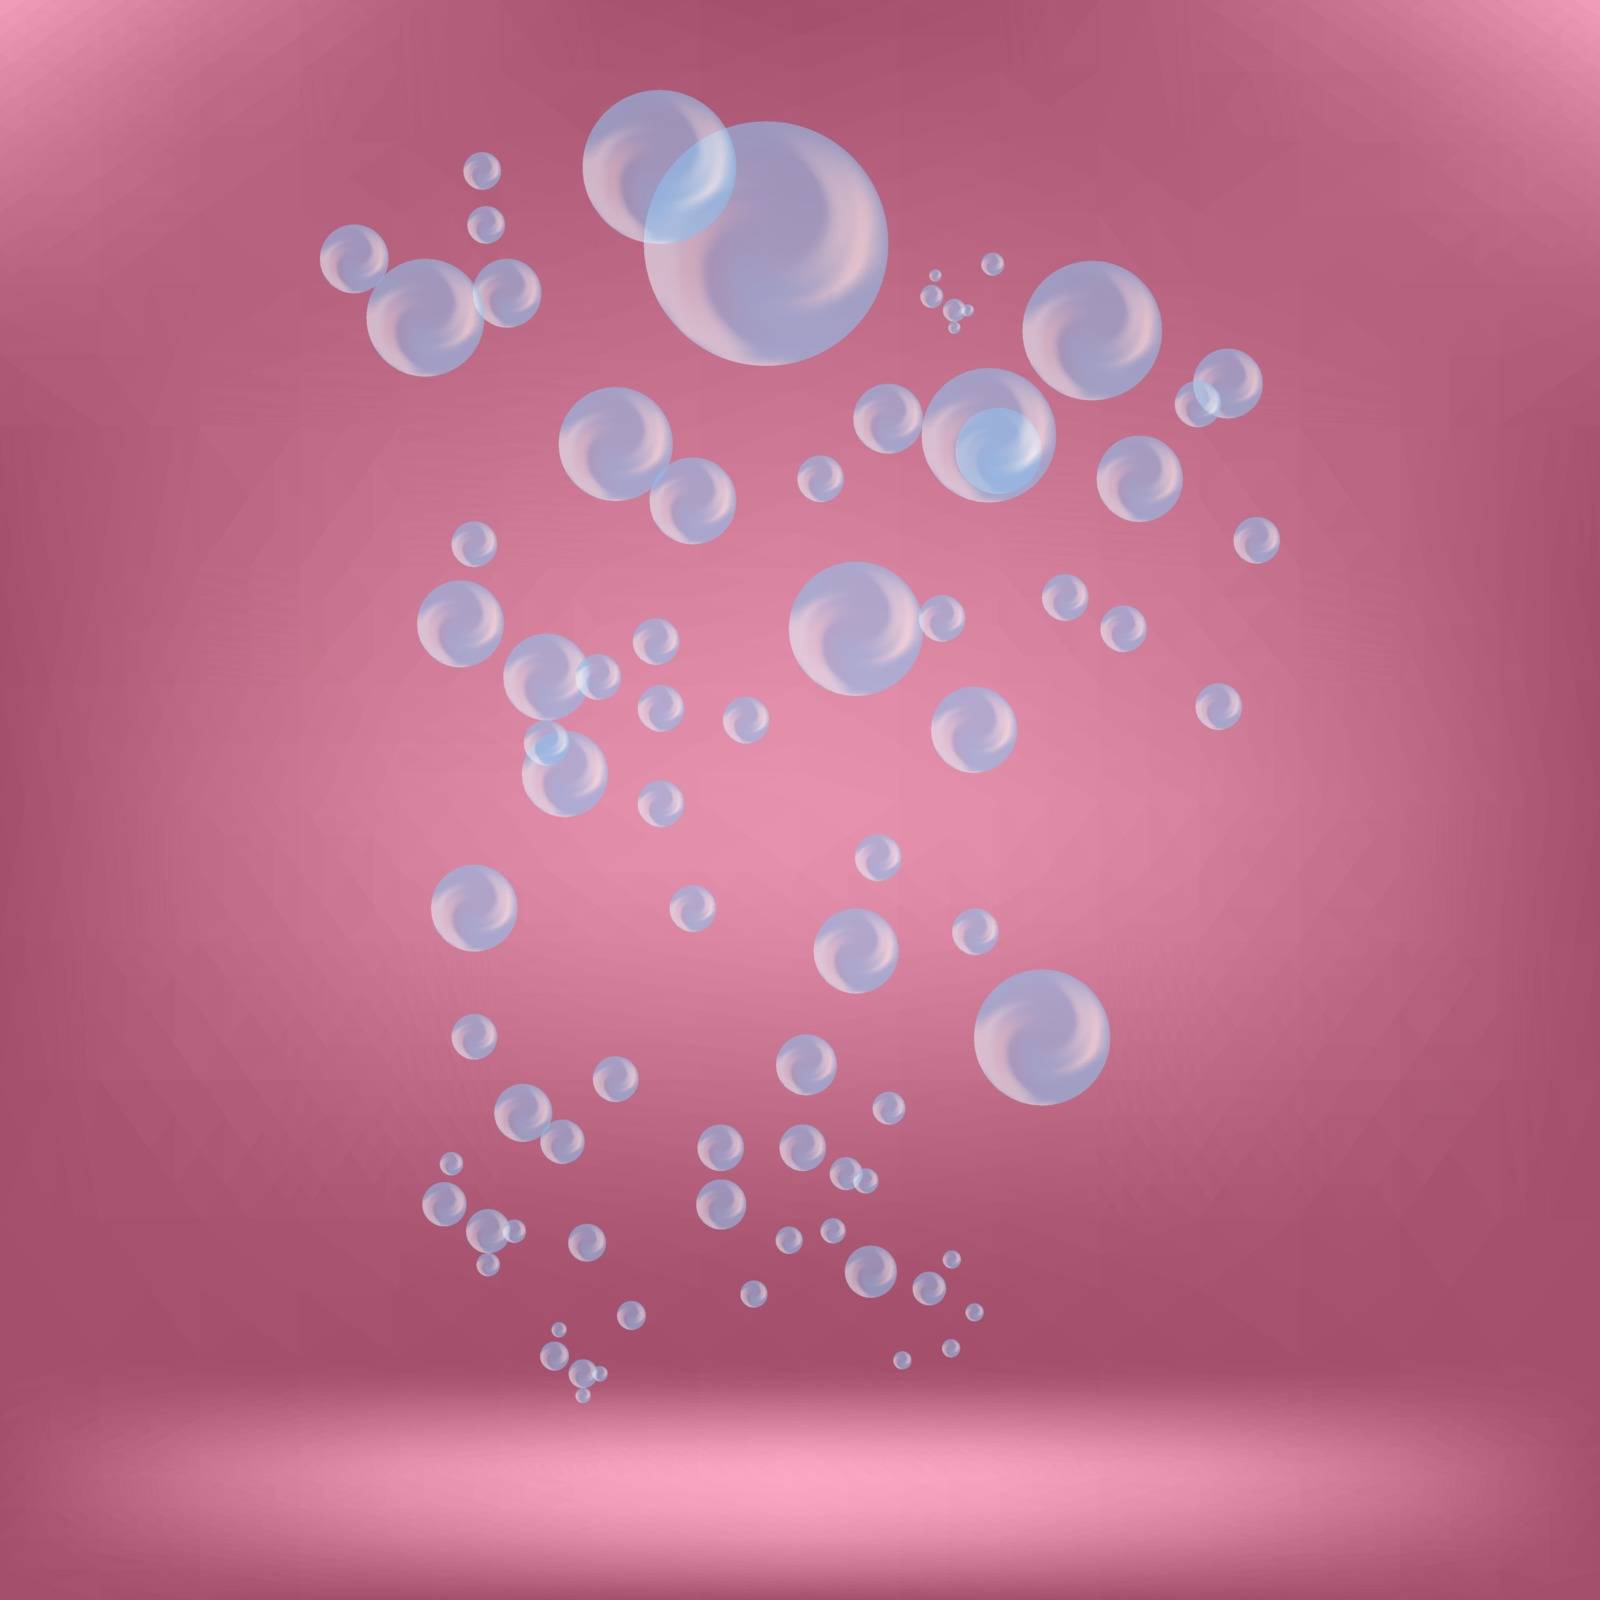 Blue Soap Bubbles Isolated on Pink Background